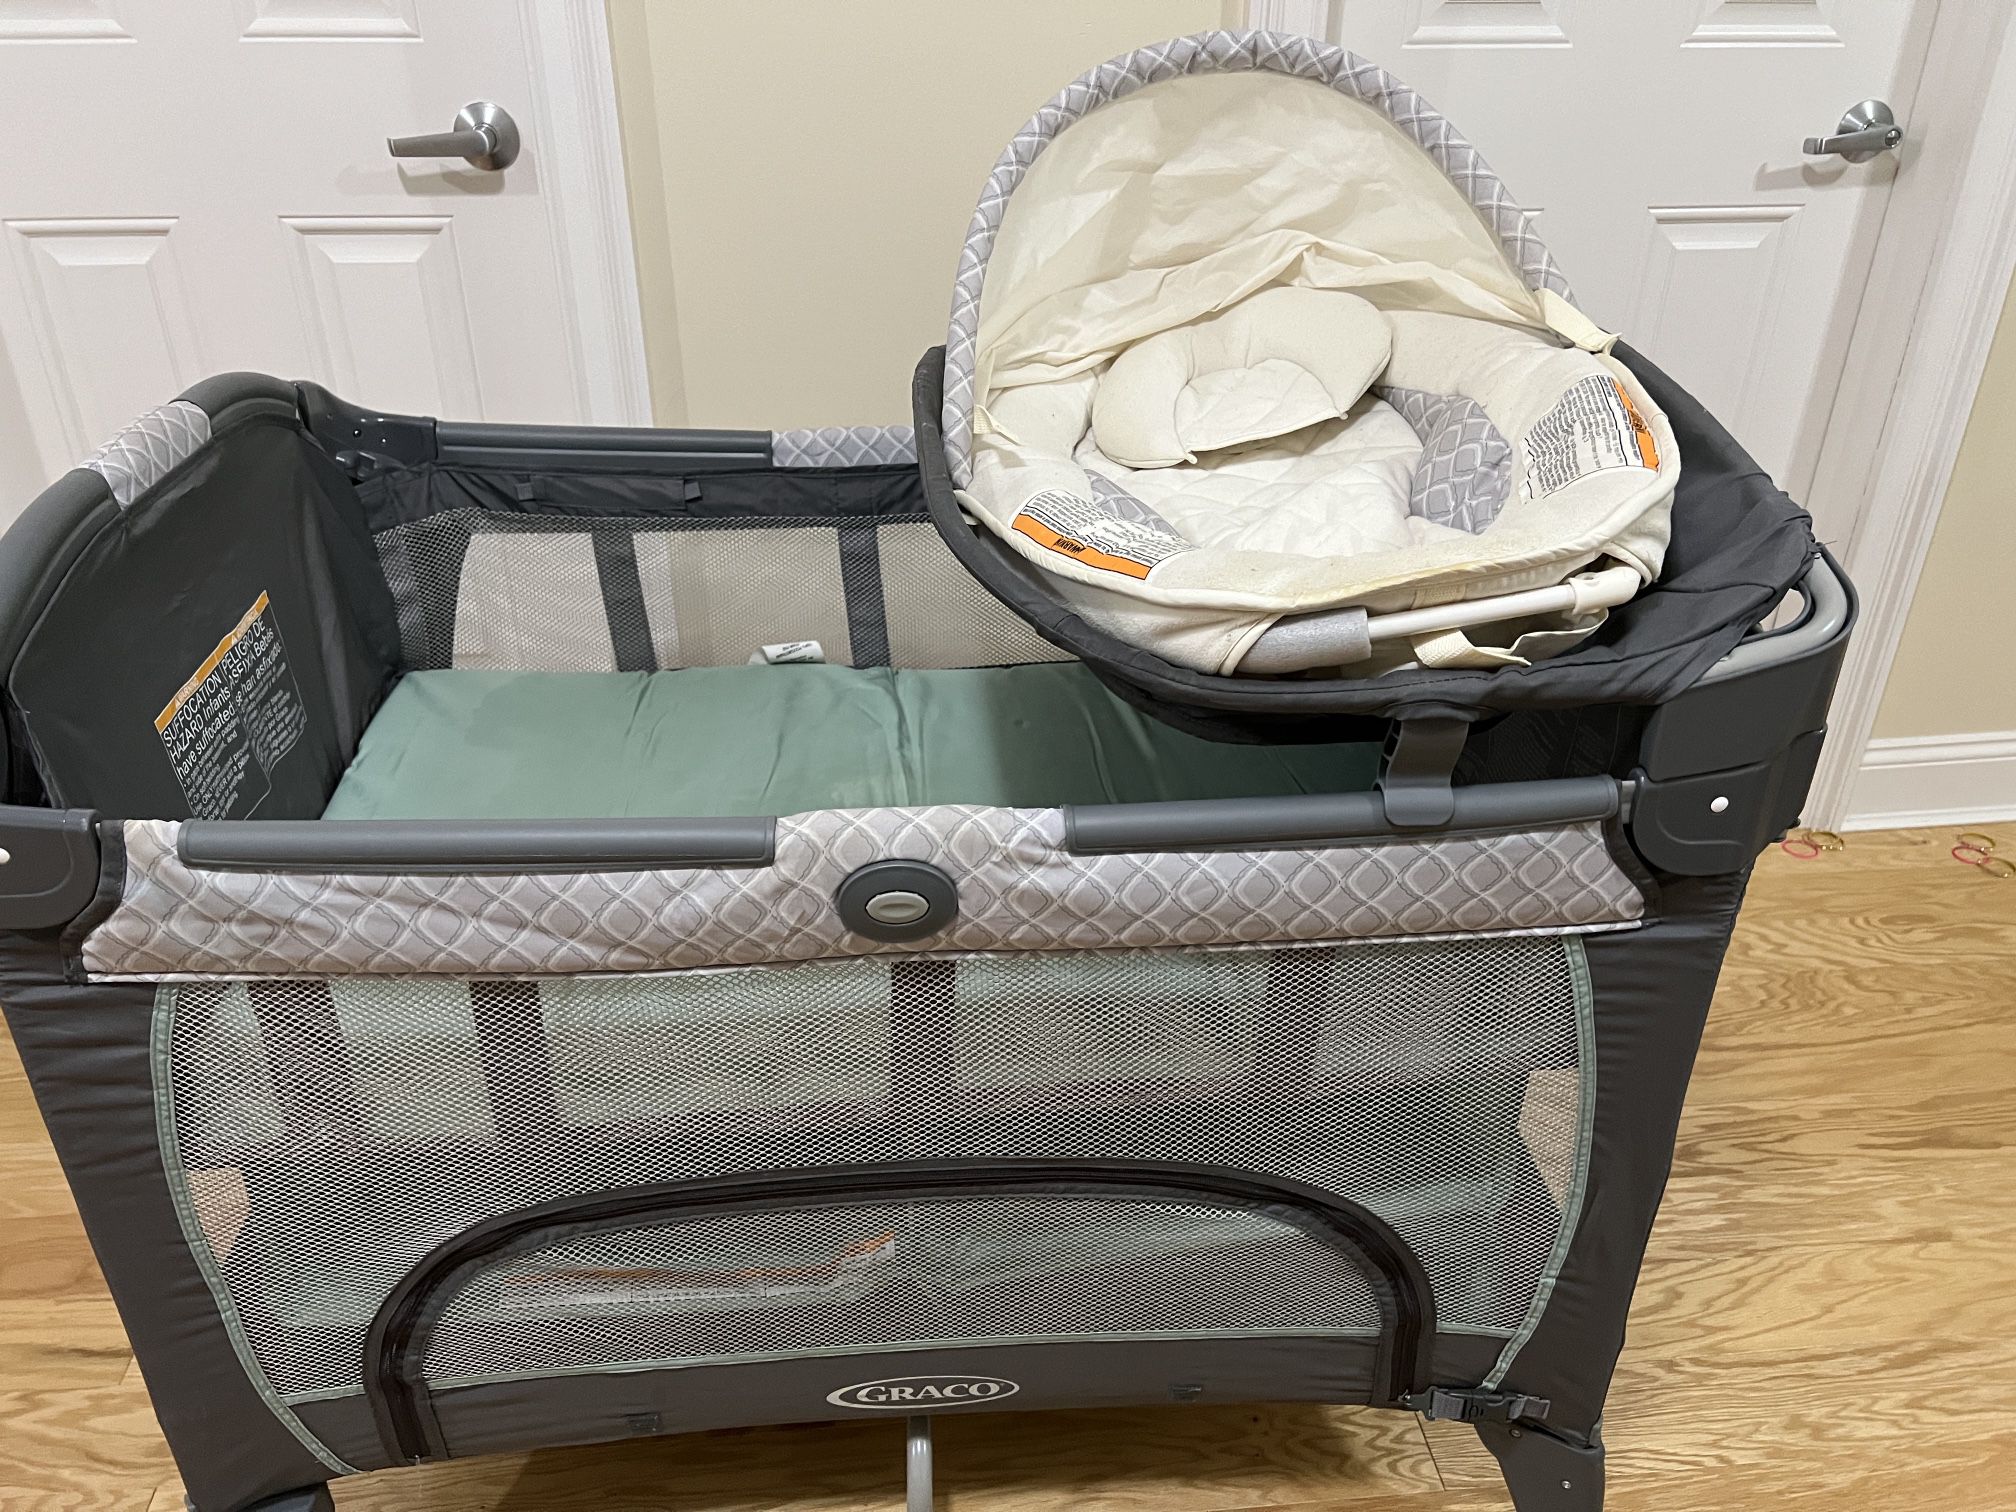 Used Graco Pack And Play